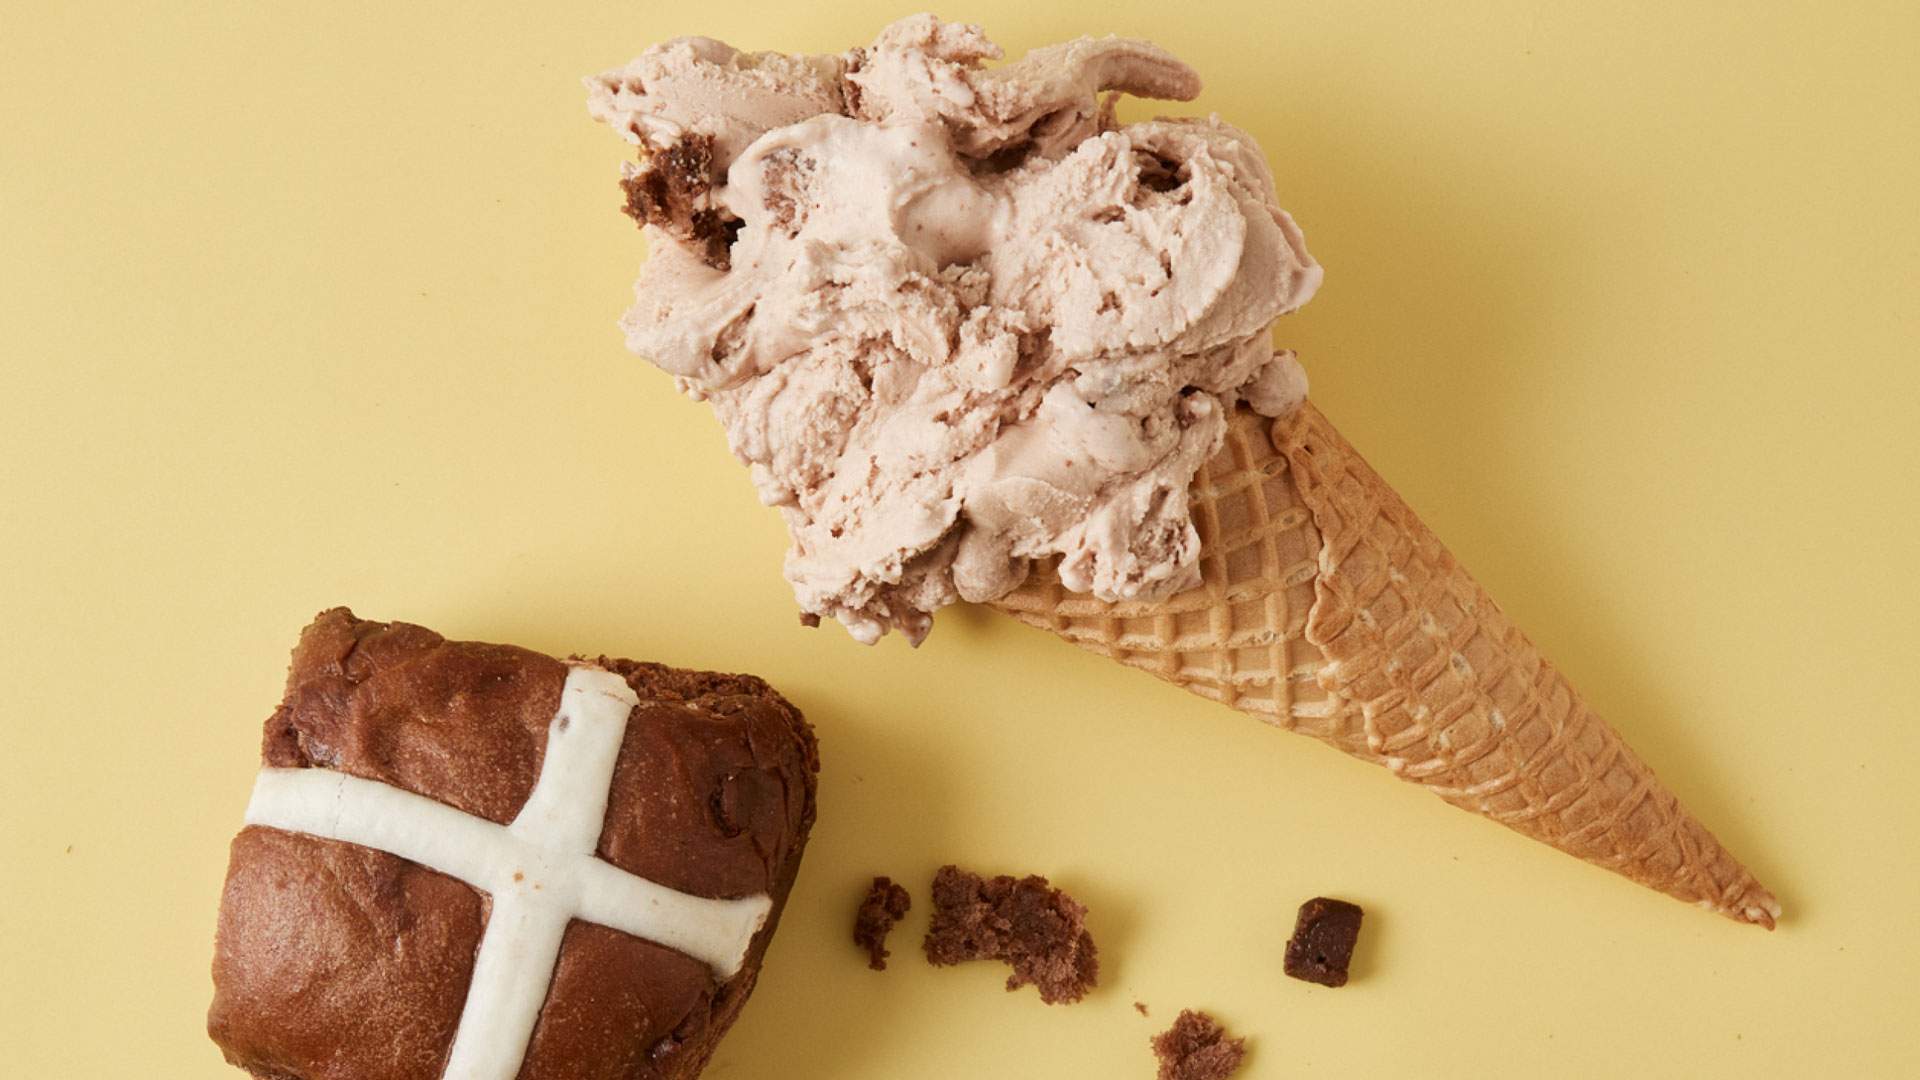 Gelatissimo Has Launched a New Chocolatey Hot Cross Bun Gelato Flavour